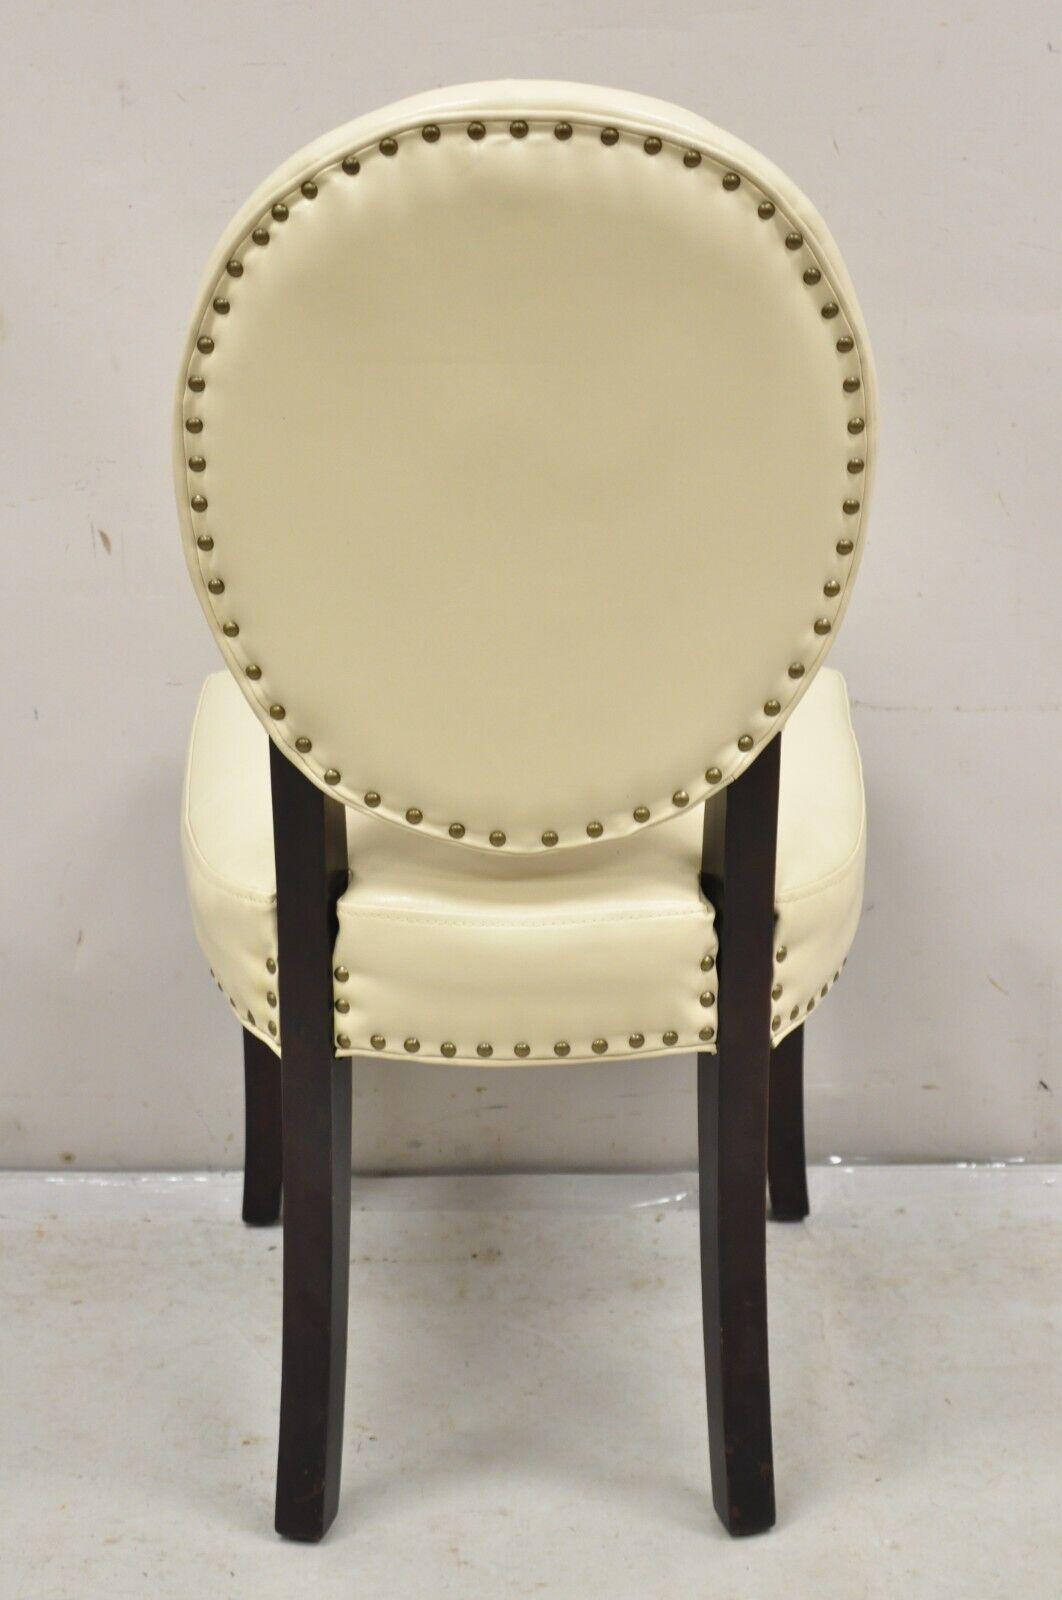 Pier 1 Imports Cadence Ivory Nailhead Oval Back Dining Chairs - Set of 6 In Good Condition For Sale In Philadelphia, PA